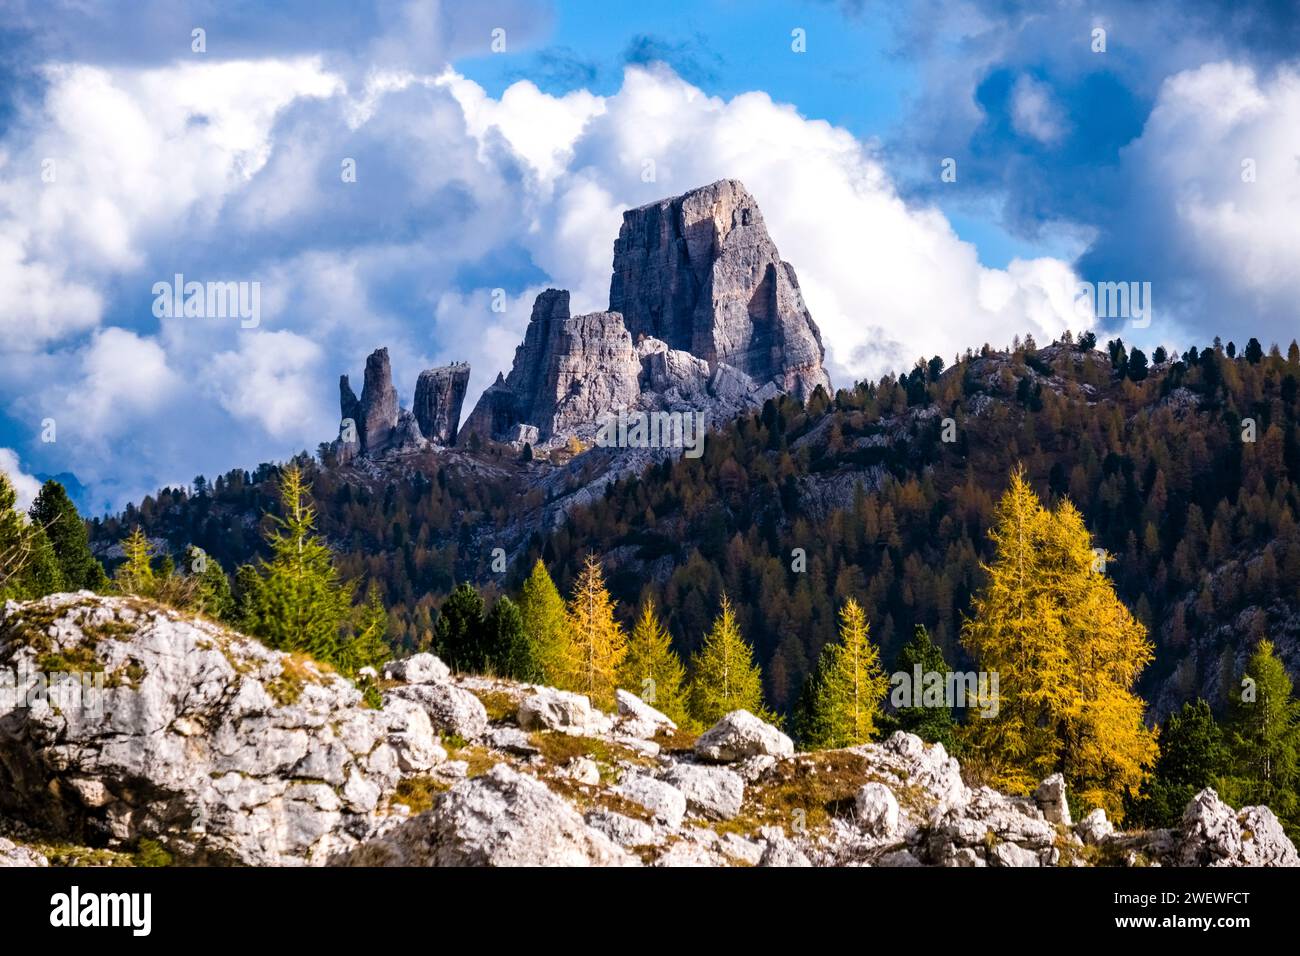 Colourful larch and pine trees on the slopes of the rock formation Cinque Torri, seen from Falzarego Pass in autumn. Stock Photo